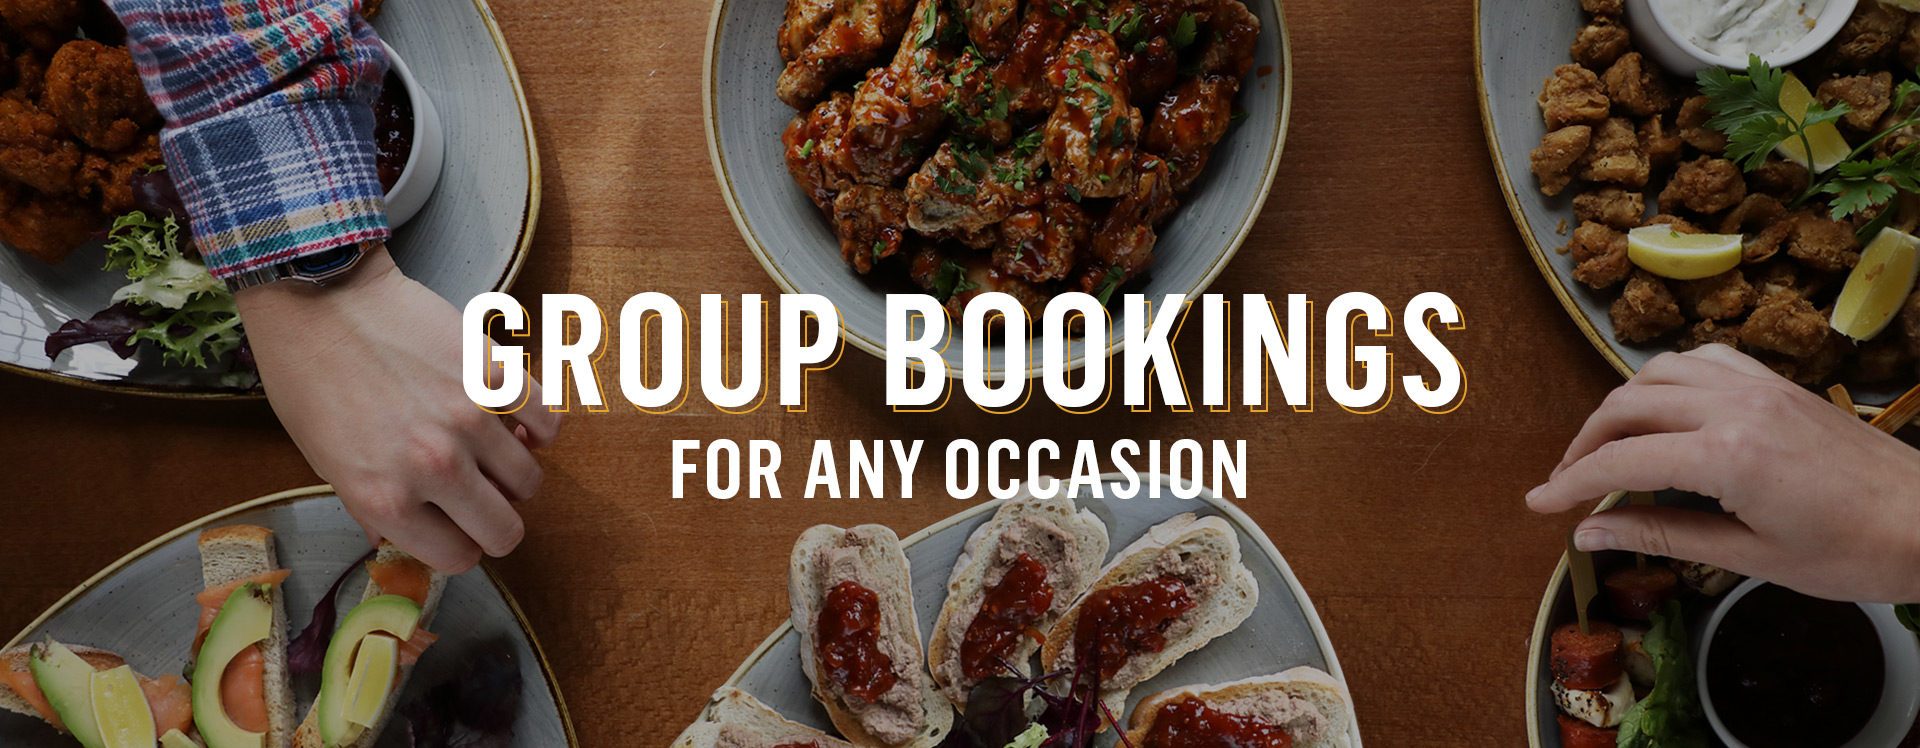 Group Bookings at The Clachan